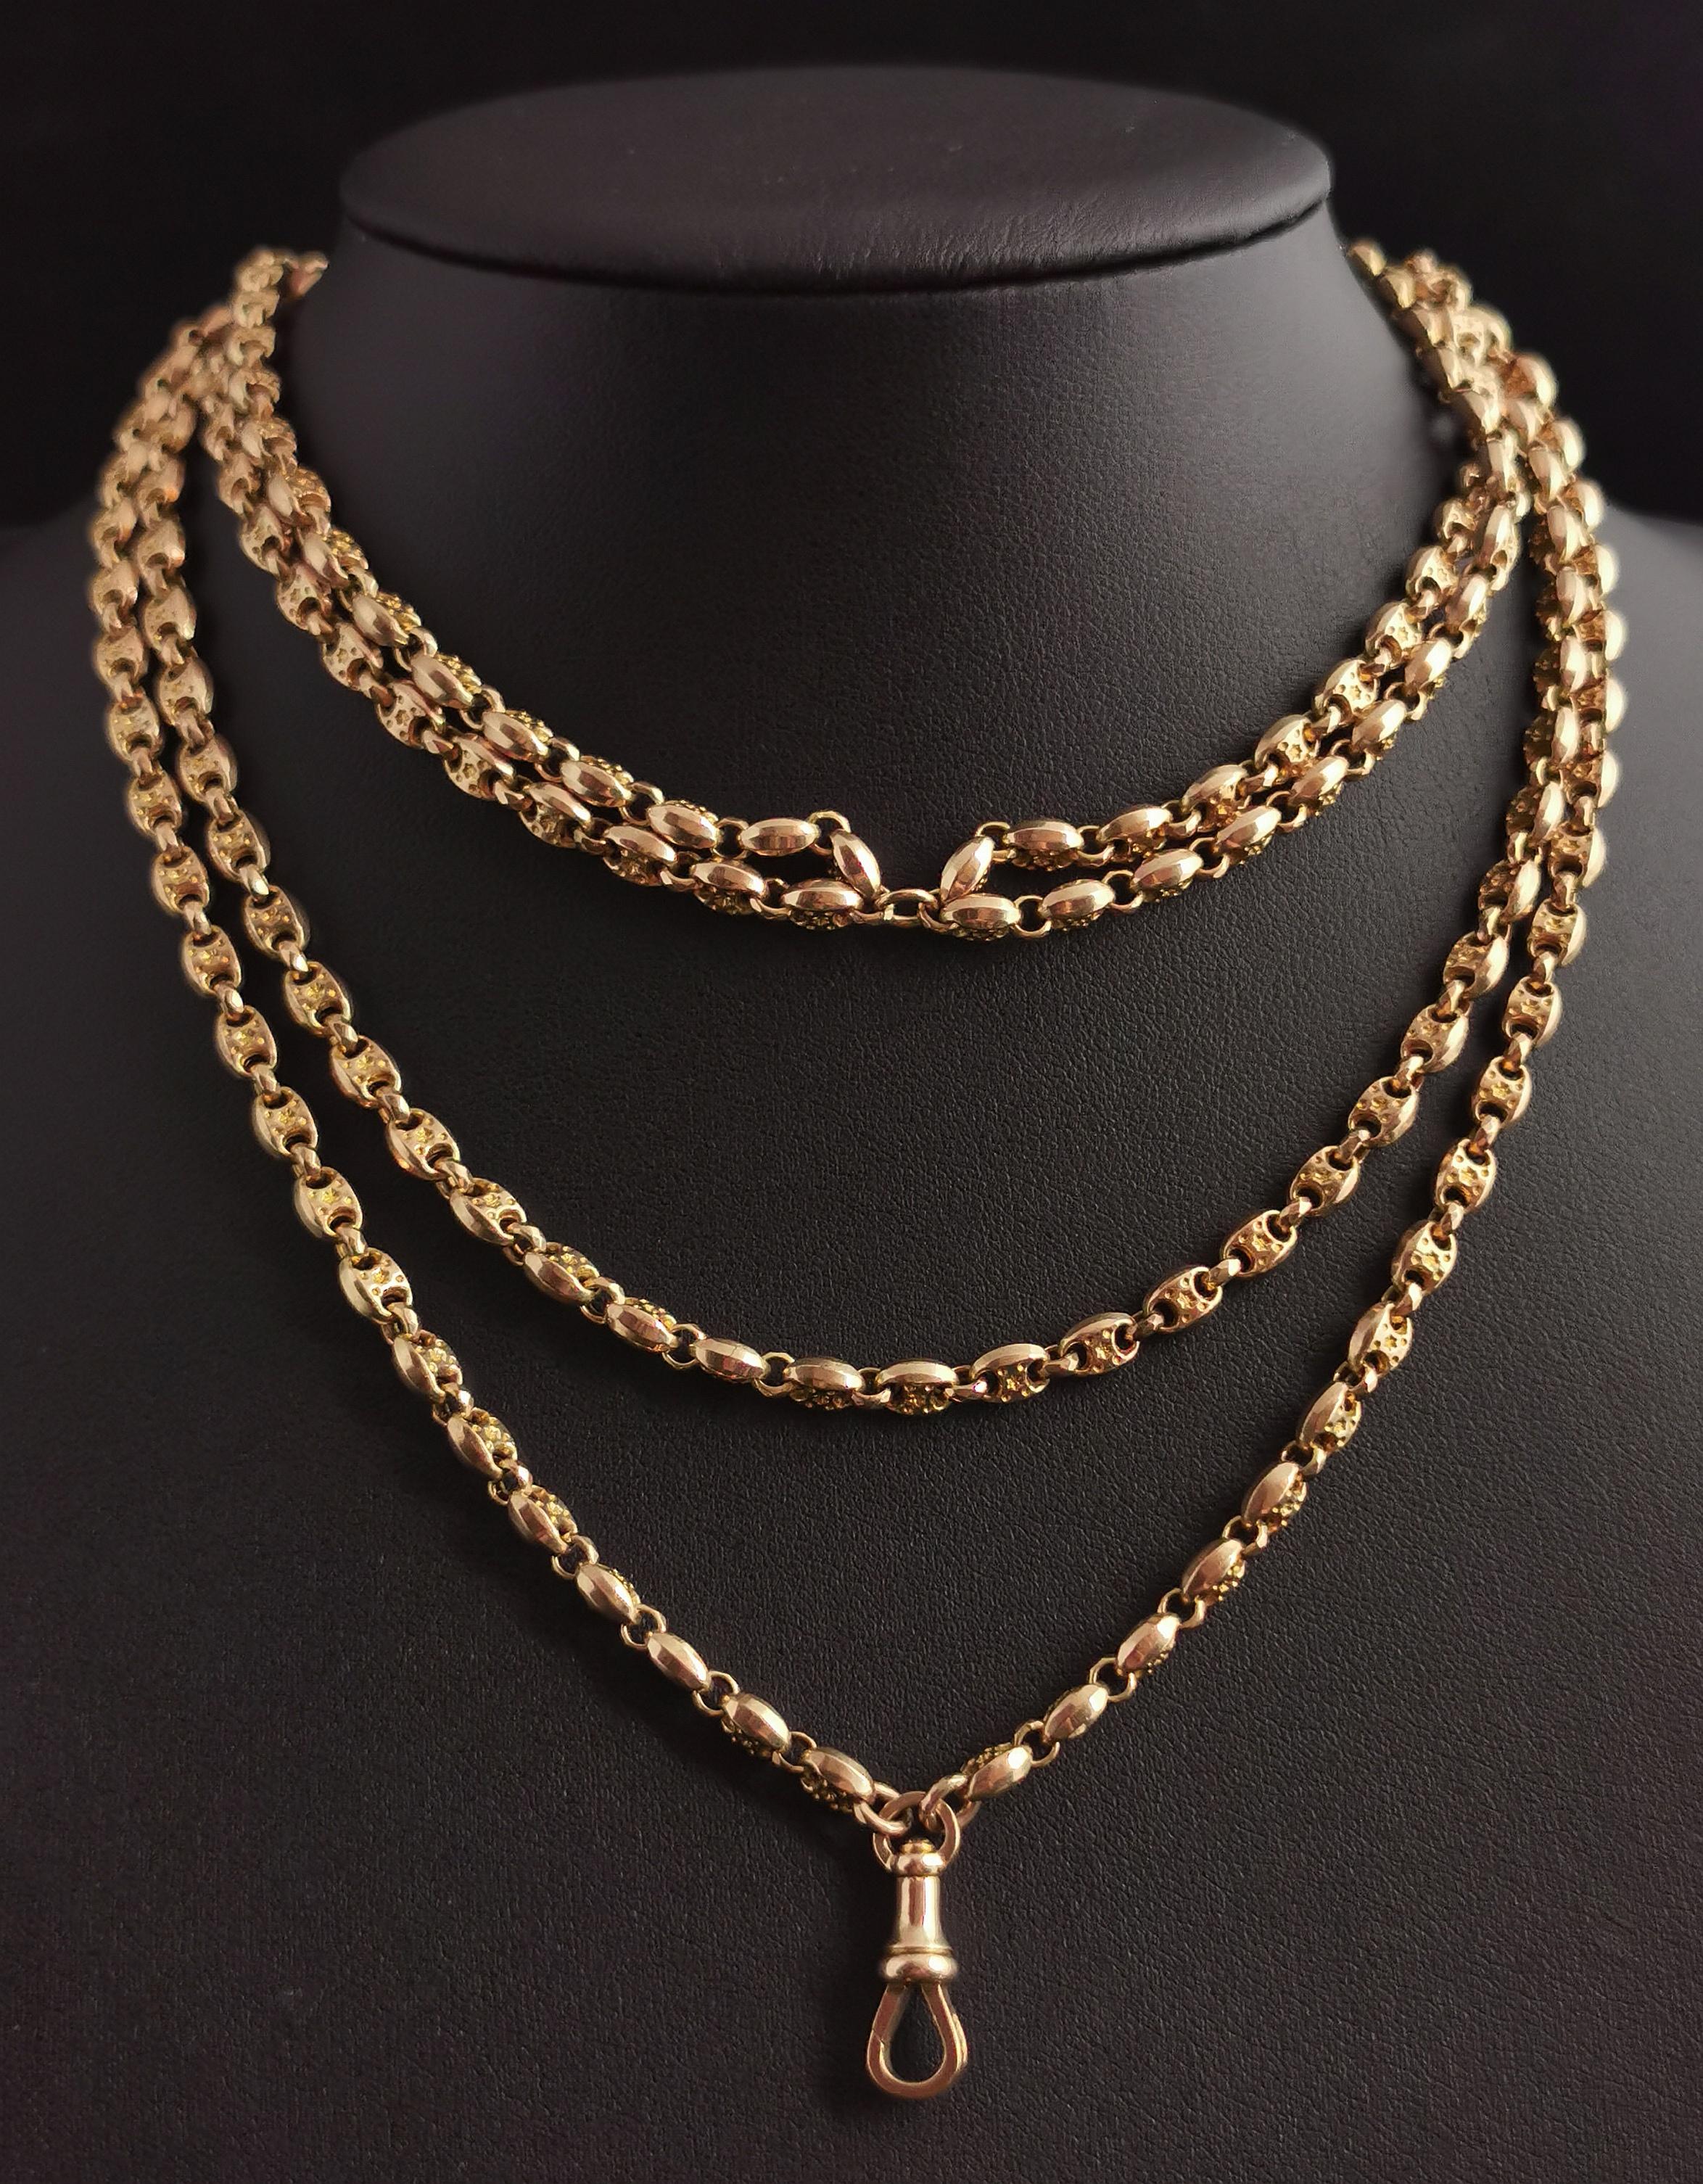 Antique Victorian Longuard Chain, 10k Gold, Muff Chain Necklace, Fancy Link For Sale 3